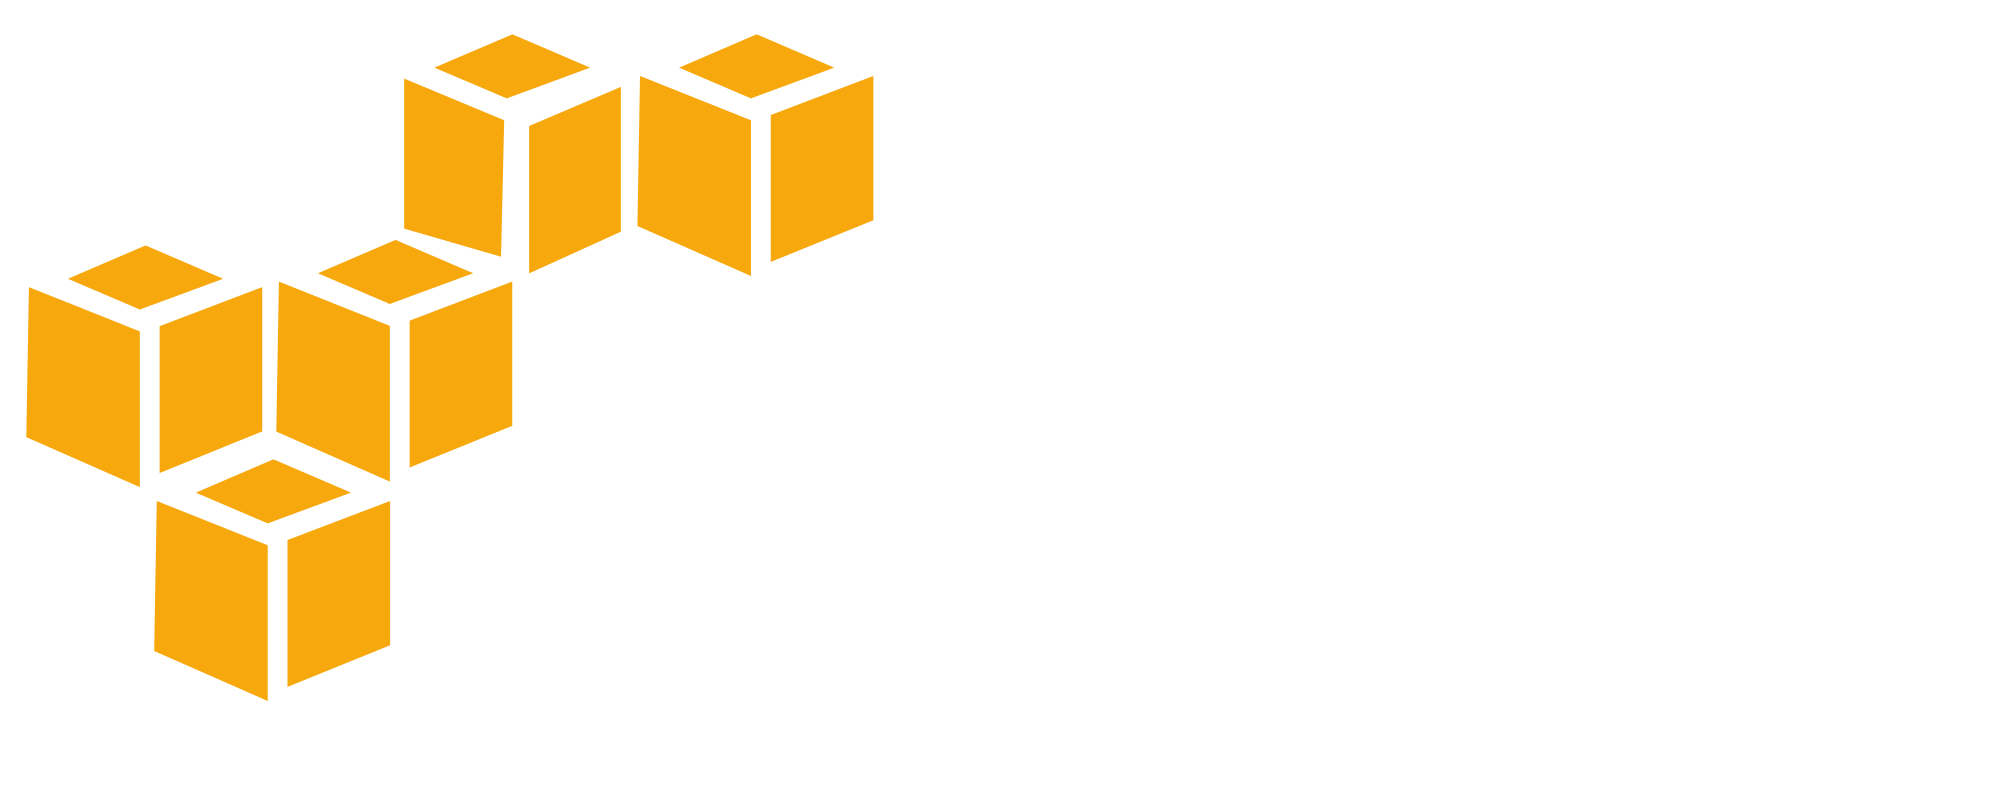 PlusAMedia's Digital Signage Cloud is hosted by Amazon